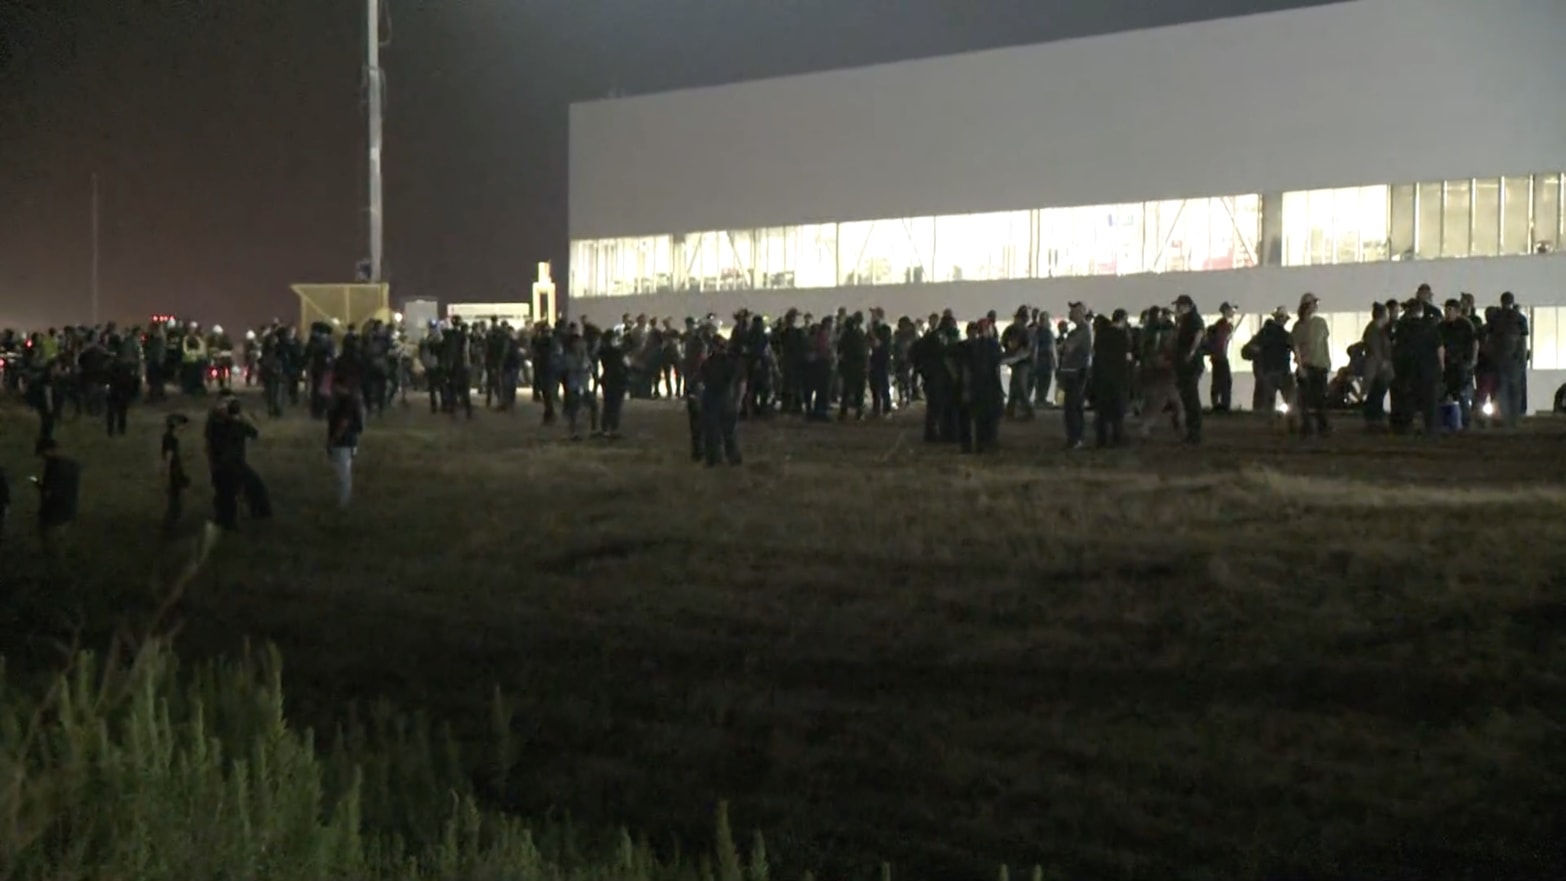 The scene outside Tesla’s gigafactory near Austin, Texas, after an “active attacker” alert was issued. 